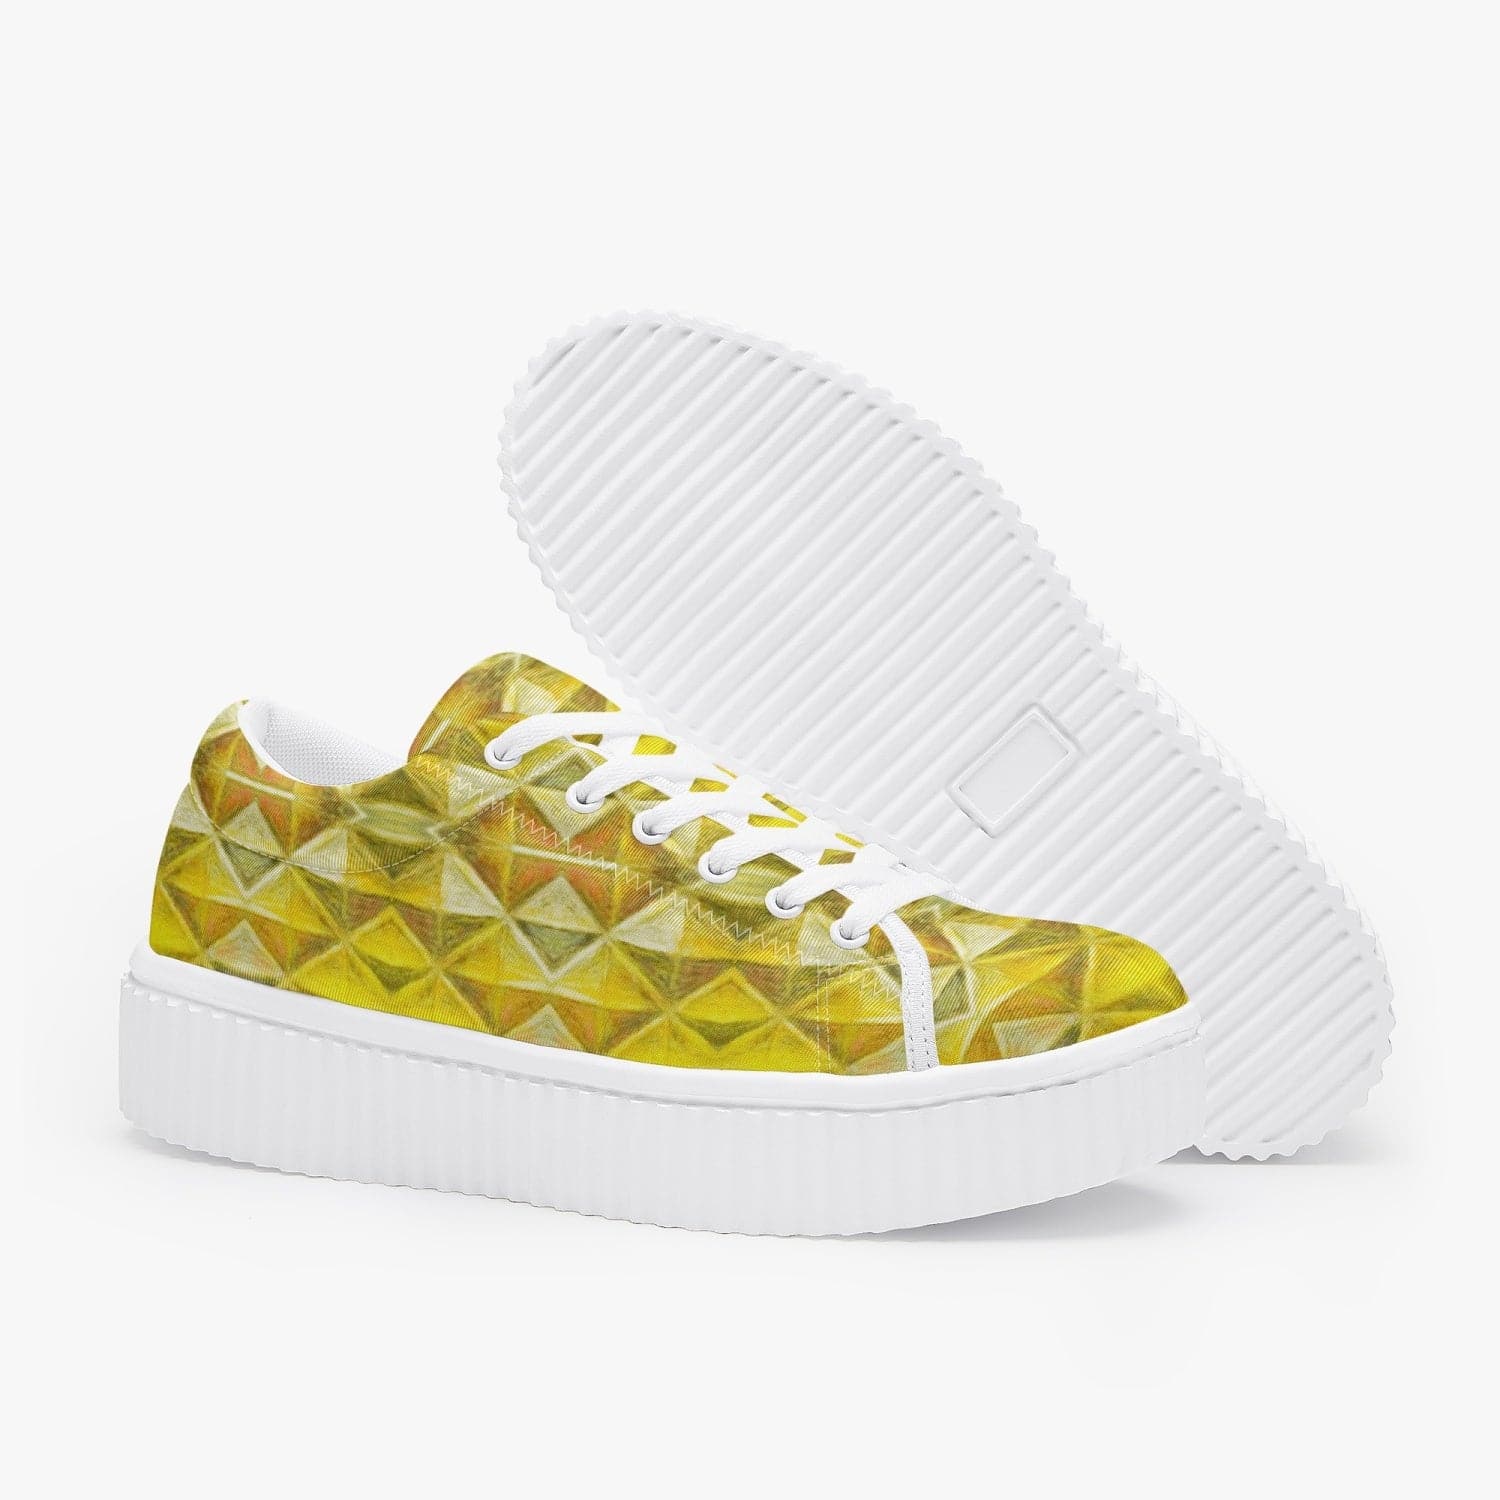 Connecting the True Purpose of Being Yellow Beautiful Patterned Women’s Low Top Platform Sneakers,by Sensus Studio Design